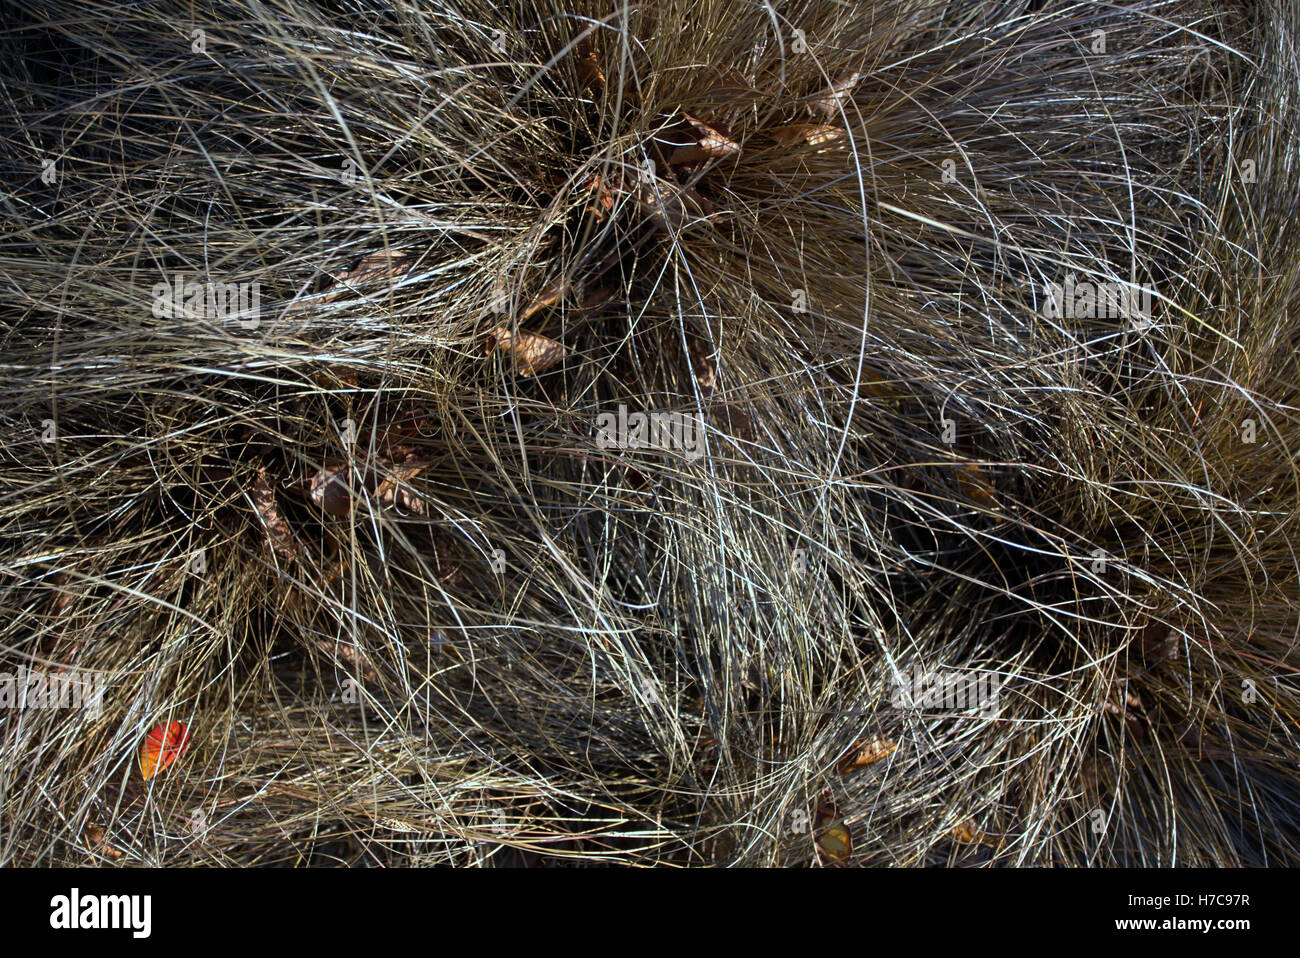 Abstract grass backgrounds on the forest floor Stock Photo